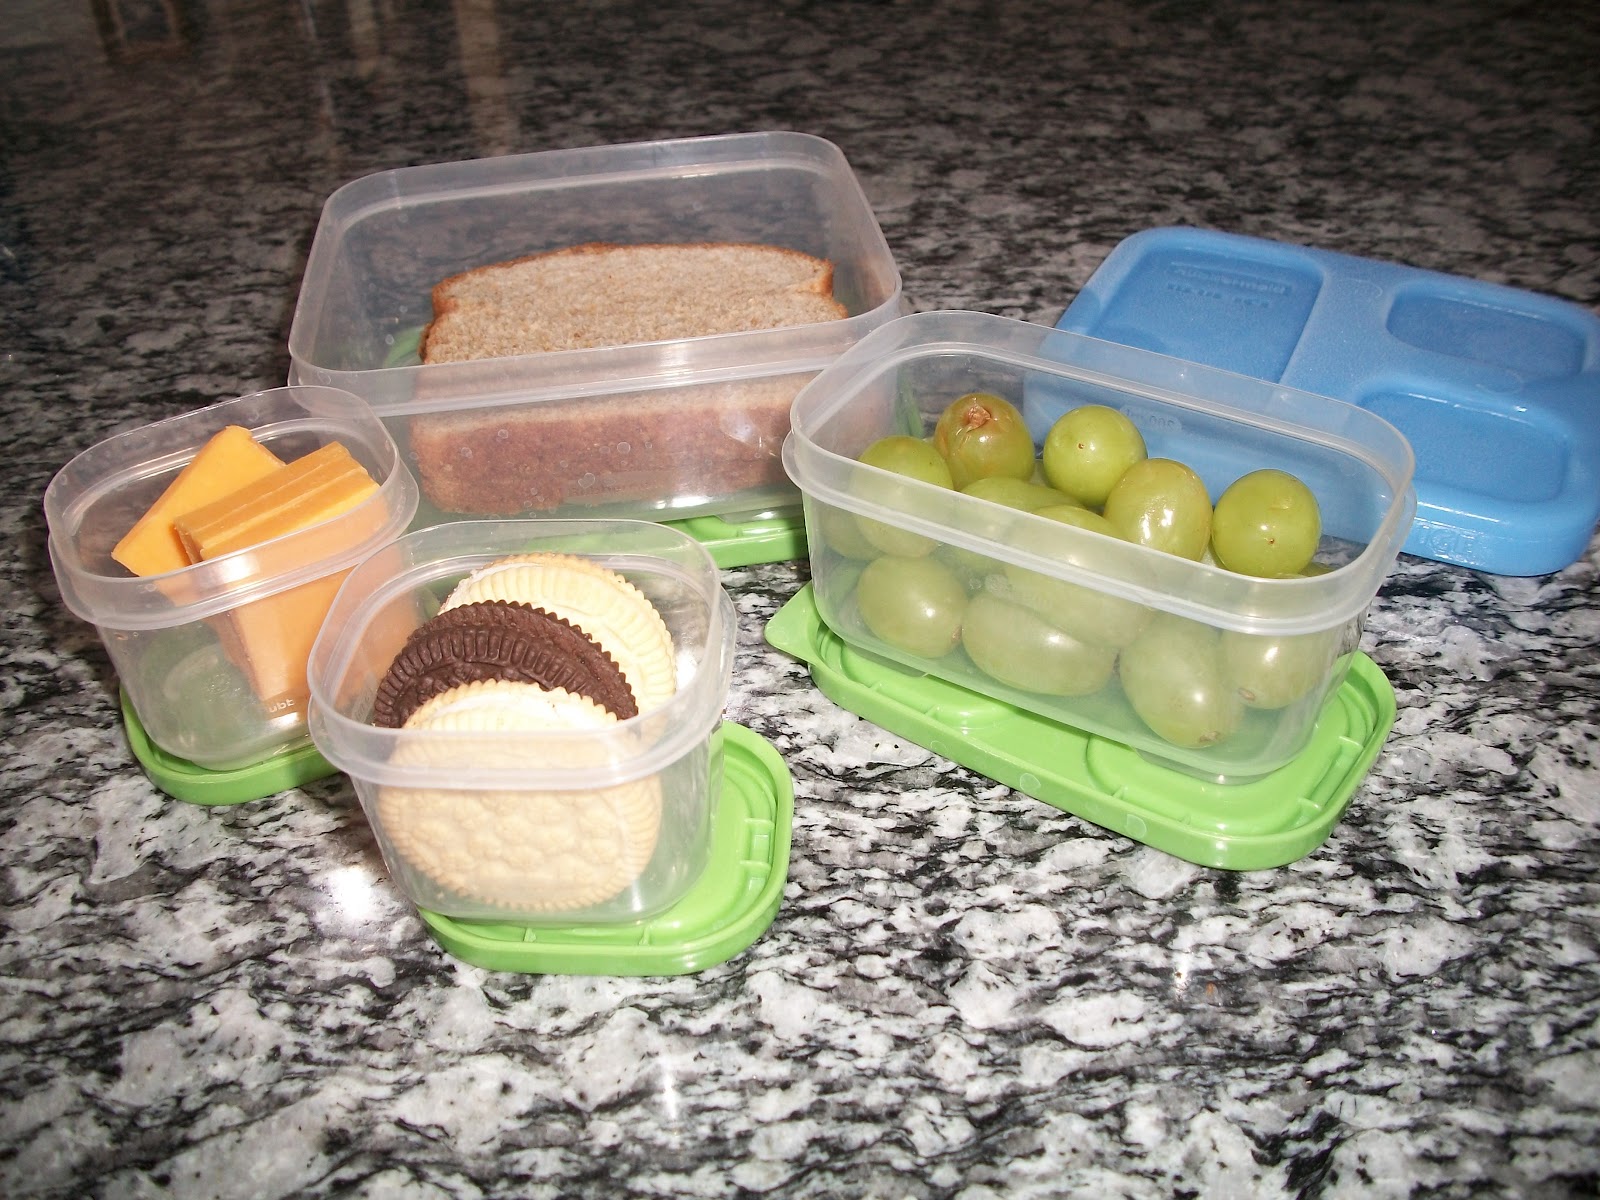 Rubbermaid Lunch Blox Snack Kit - Lunch Box Food Containers - Comes with 1  Ice Pack, 2 Small, and 1 Long Container - Great